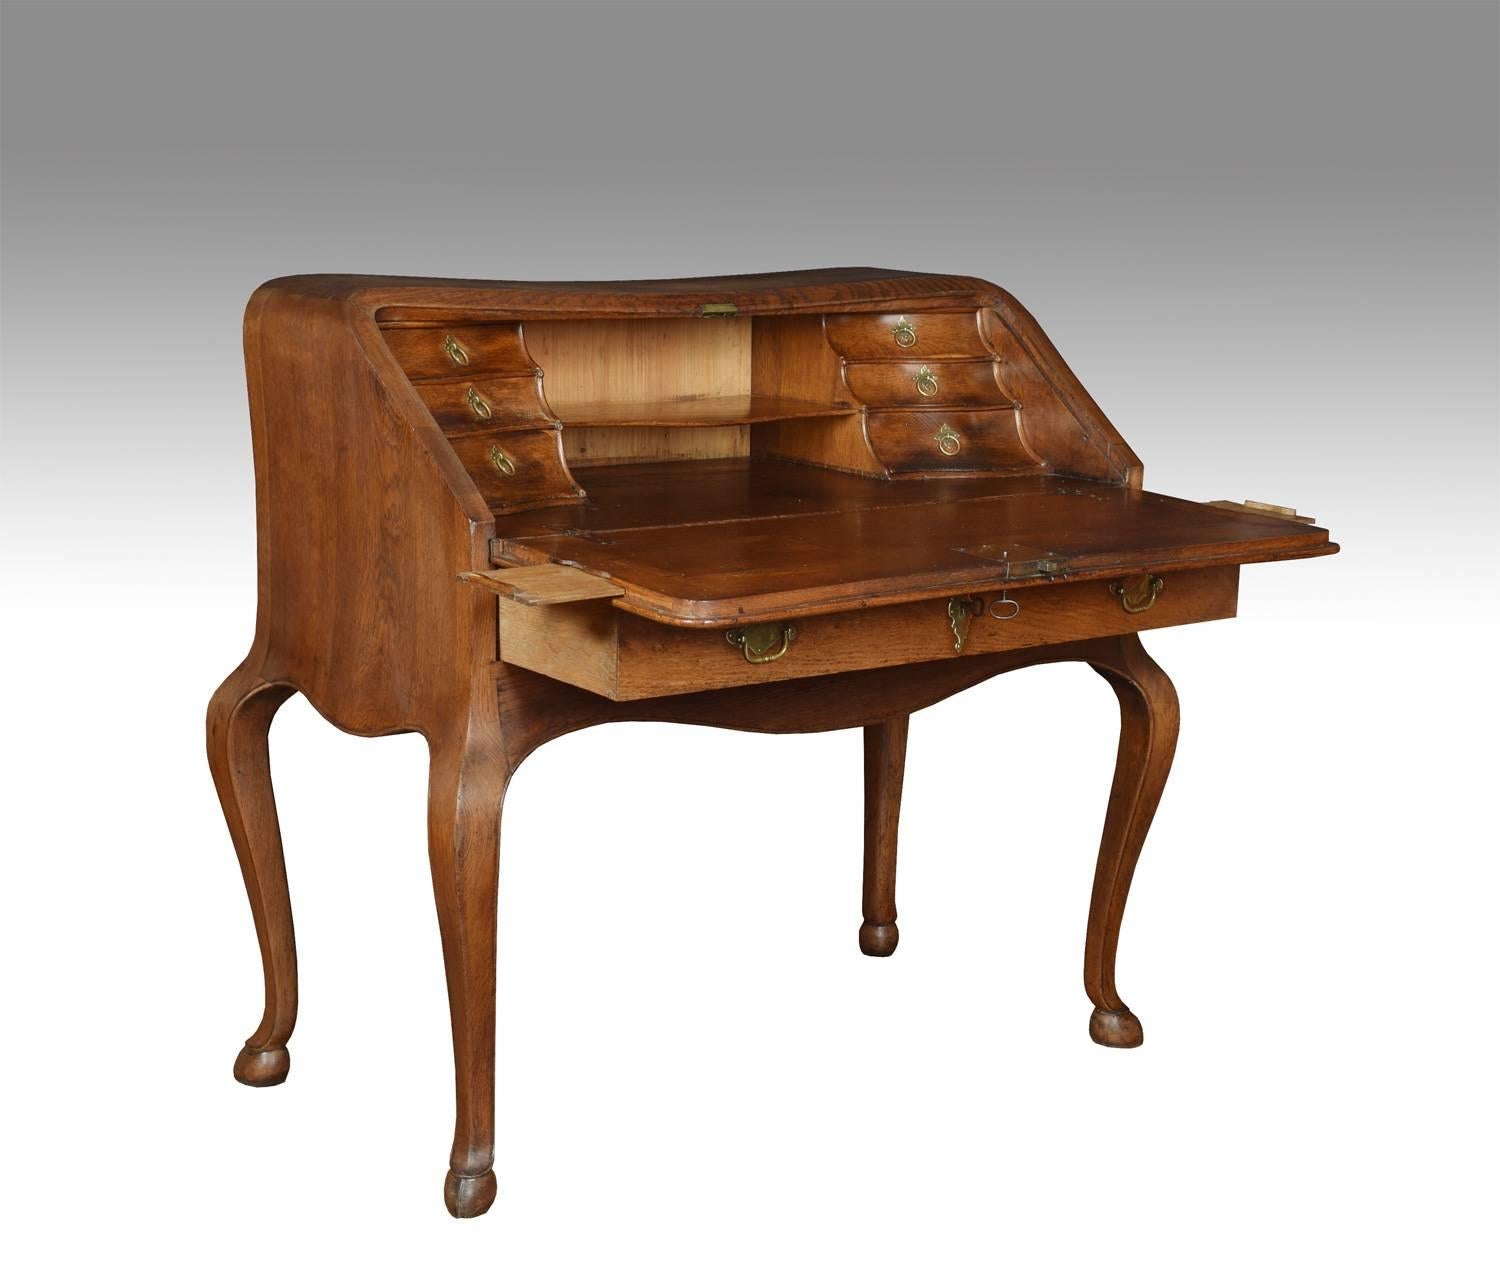 Continental oak bureau, the serpentine shaped top to the fall front opening to reveal a fitted interior, of draws and pigeon holes surrounding a large writing surface with pull-out candle holders, with a large single draw below. All raised up on